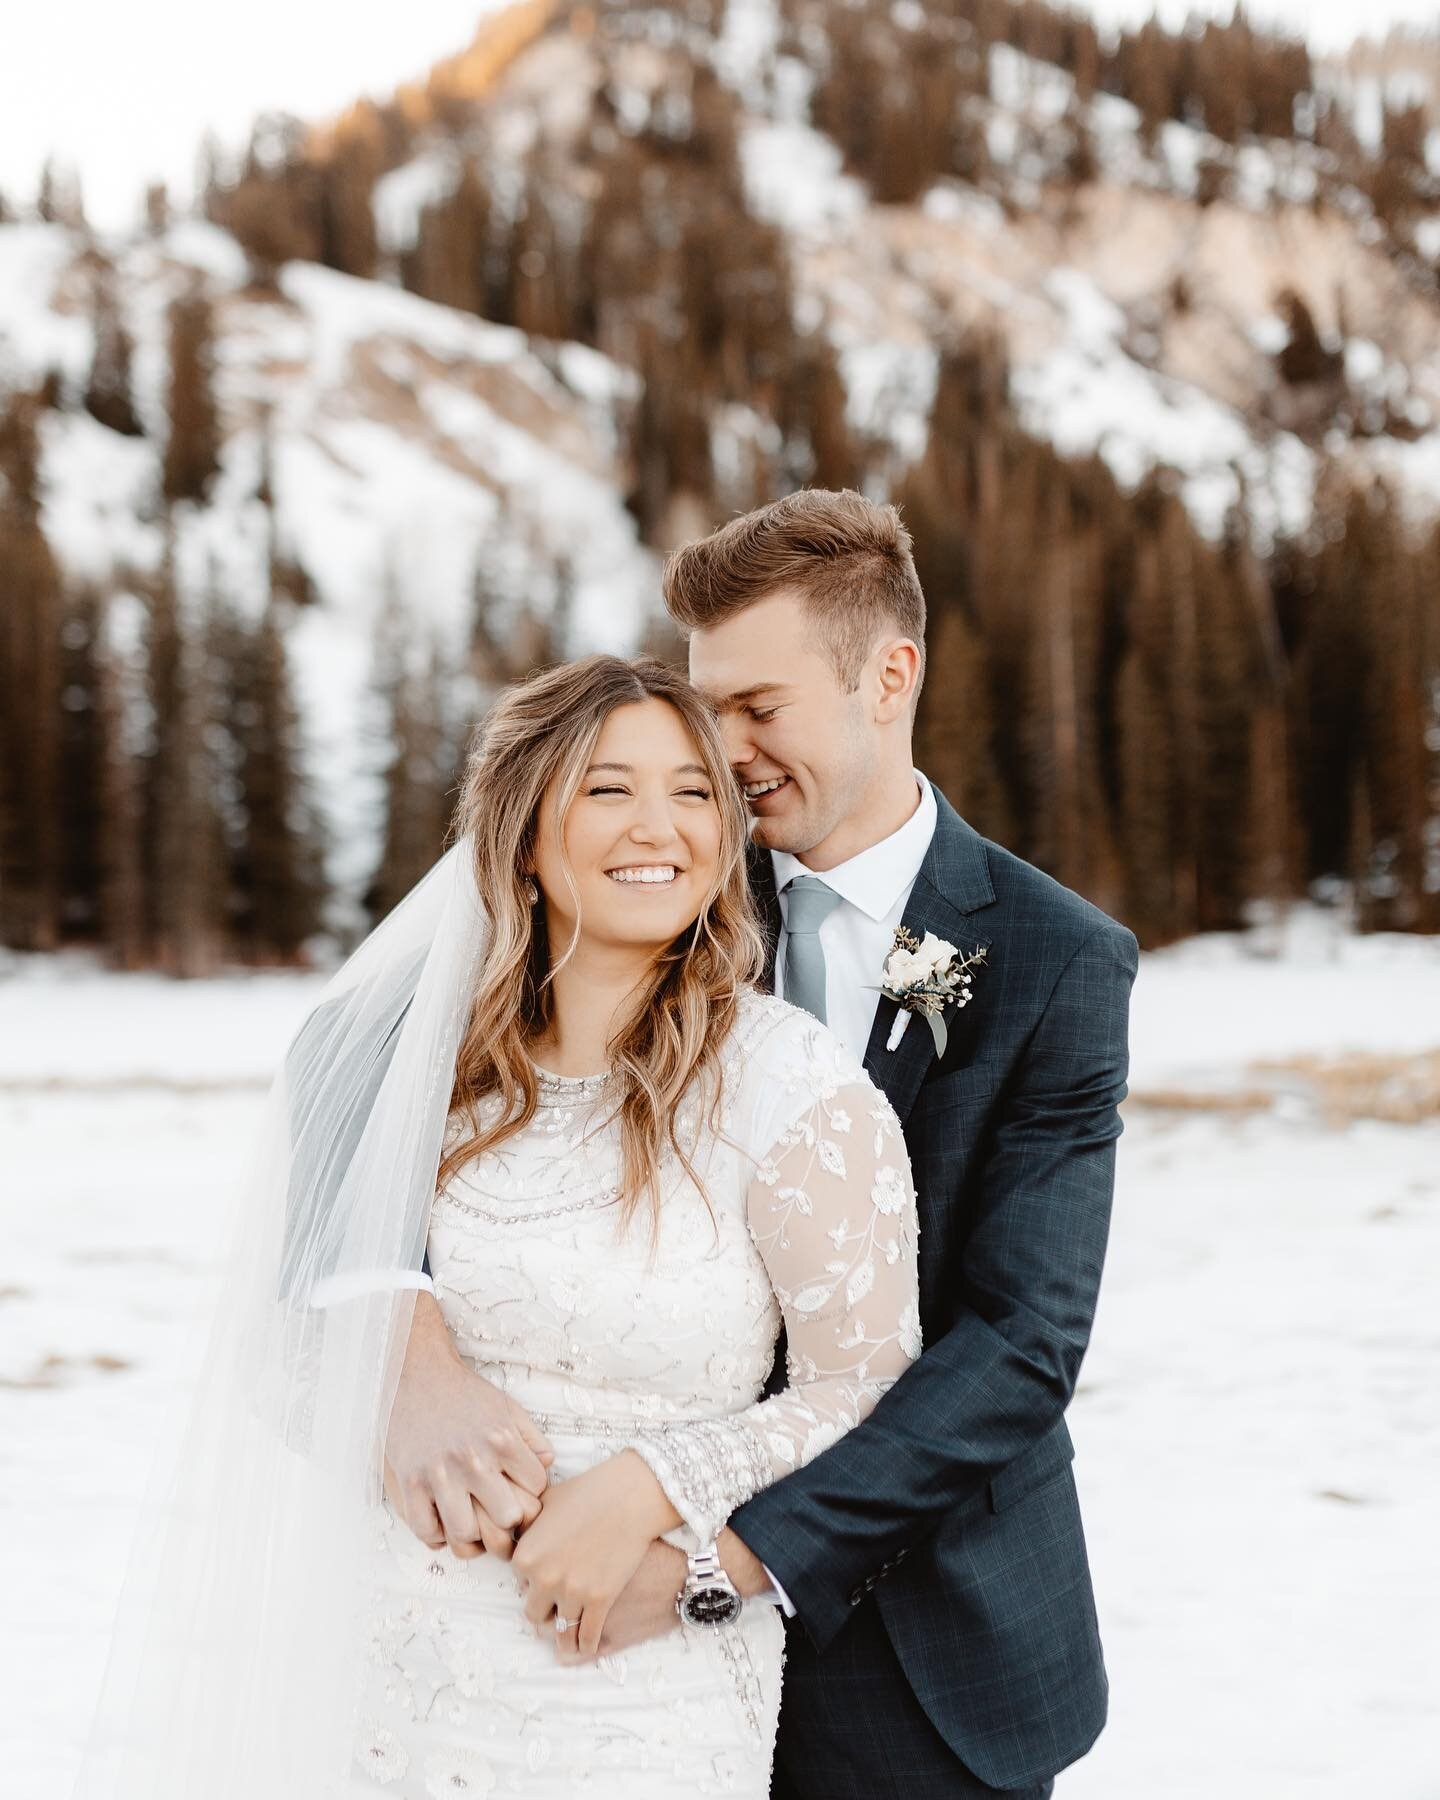 In honor of Alex &amp; Austin&rsquo;s wedding day, here are a few of my favorites from their dreamy snow formals! ❄️🤩